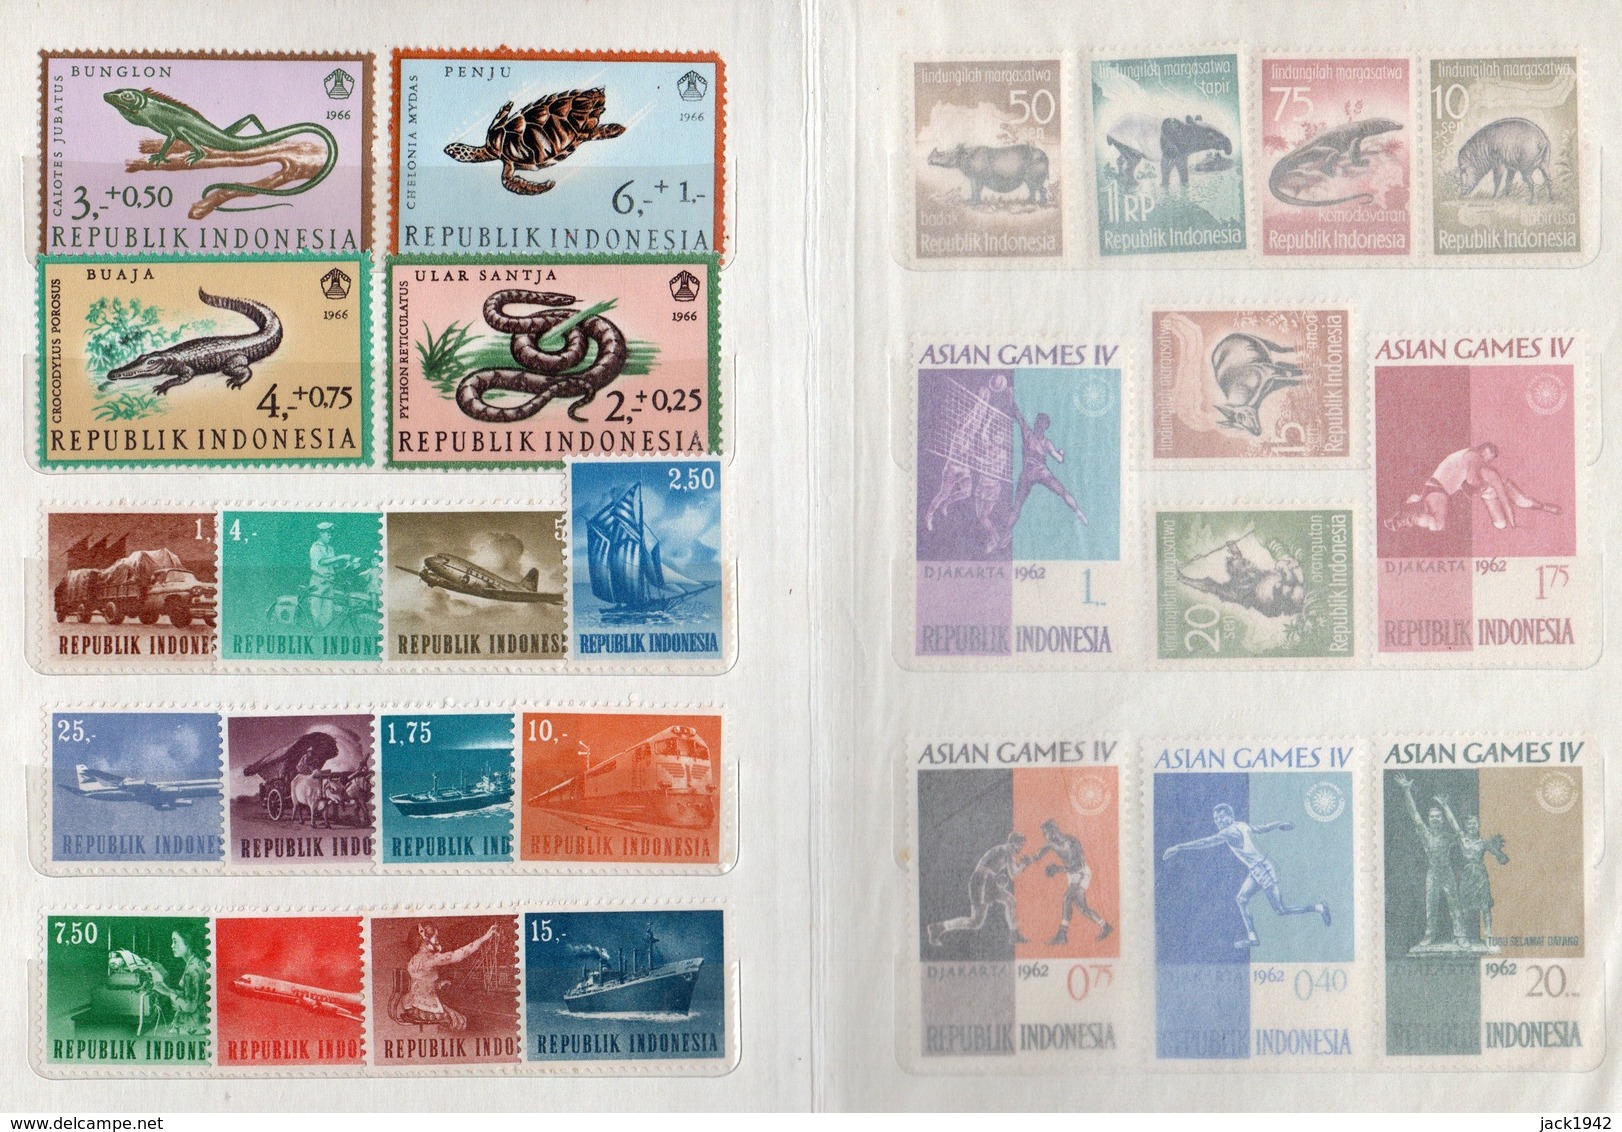 Collection of 160 stamps of Indonesia 1960's in a small stockbook - présentés dans un classeur